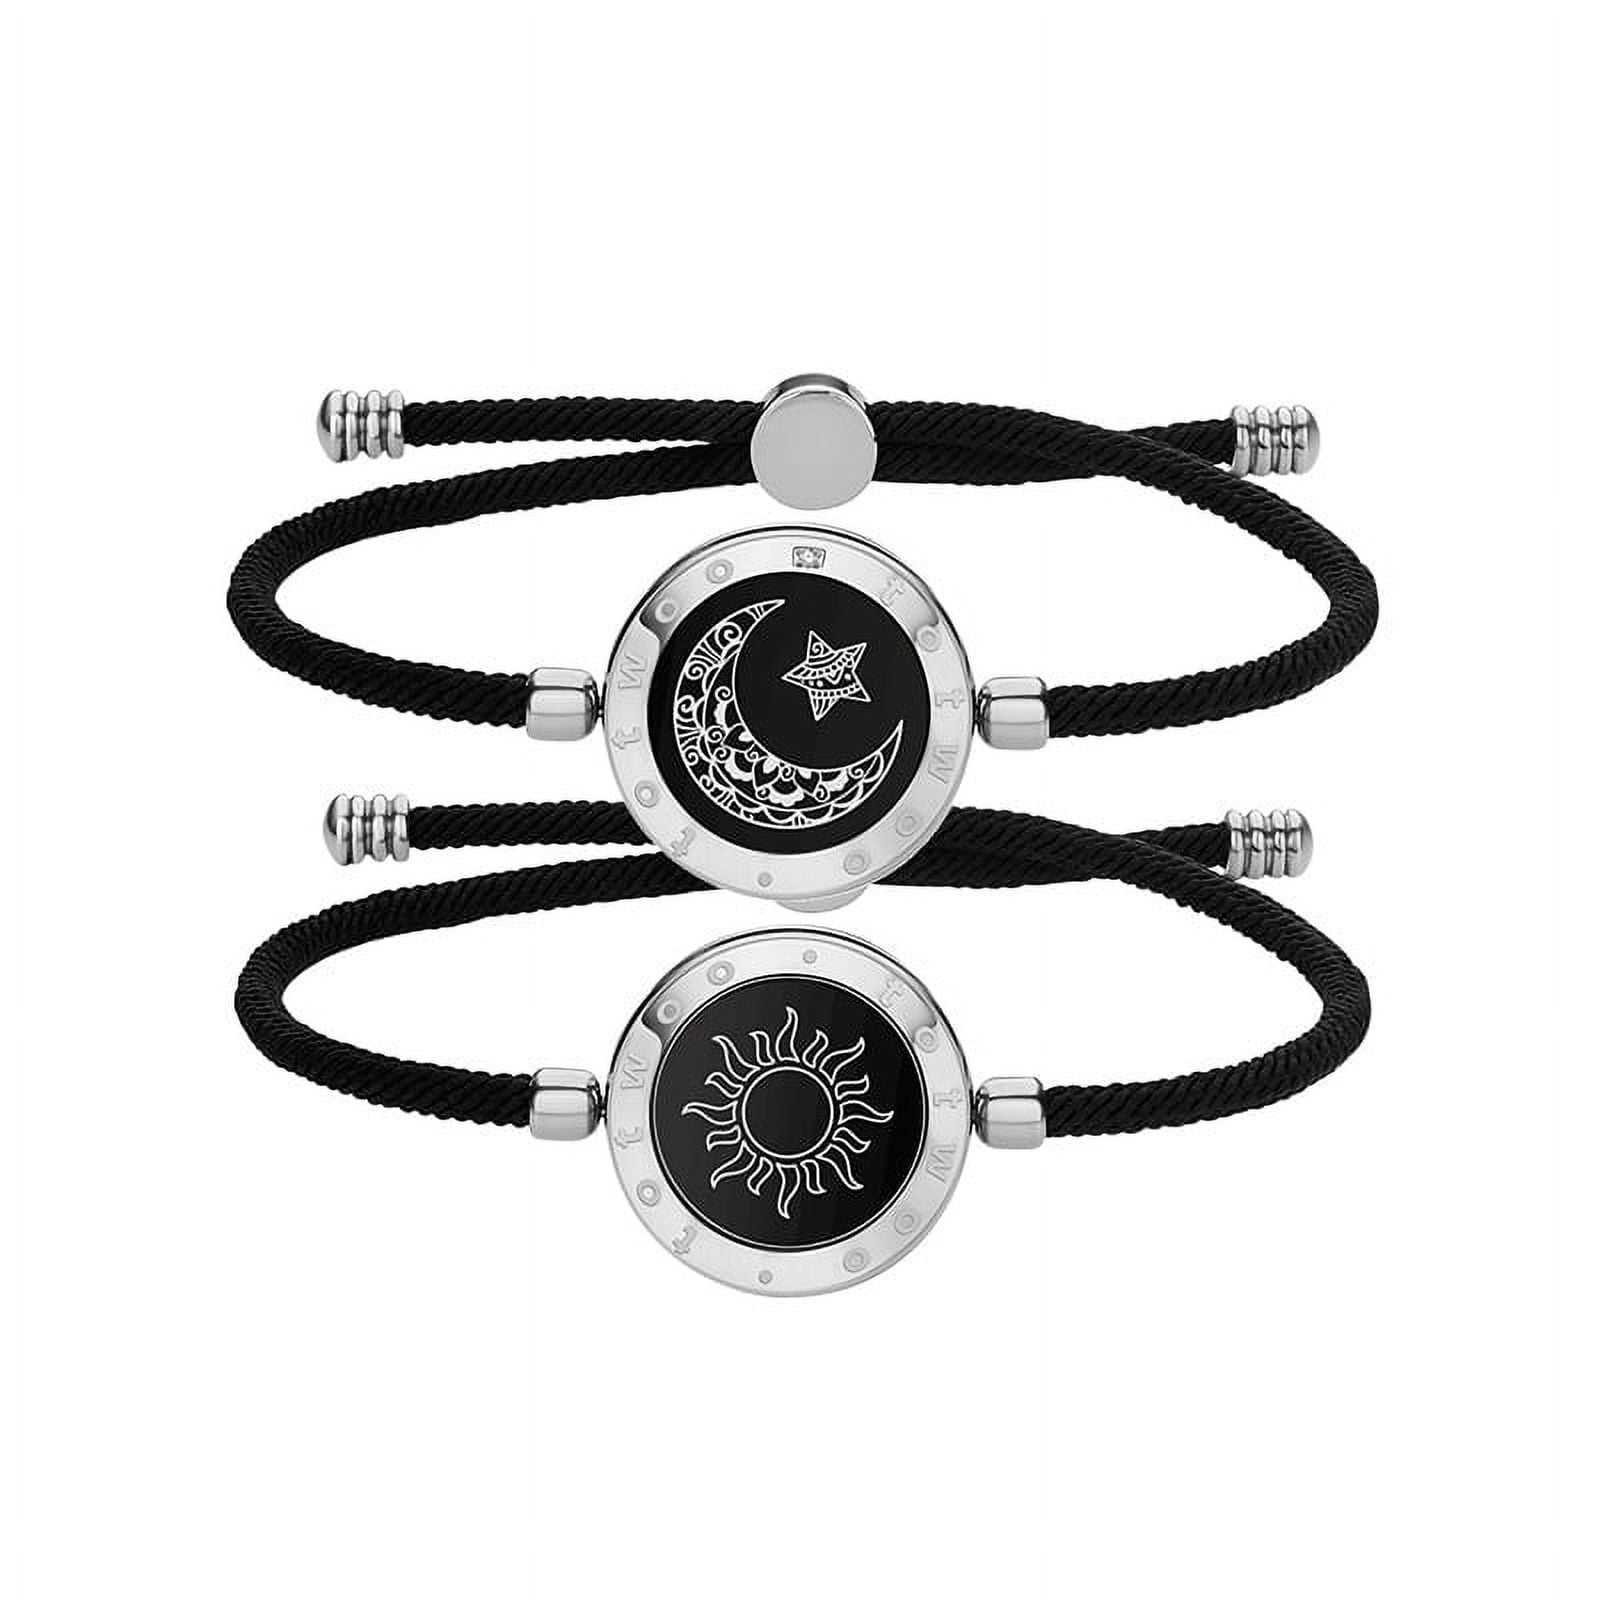 Amazon.com: BOND TOUCH Long Distance Touch Bracelets for Couples - Stay  Connected Anytime, Anywhere - Unique Relationship Gifts with Real Time  Messaging and Customizable Colors - Pair of Bond Bracelets : Electronics